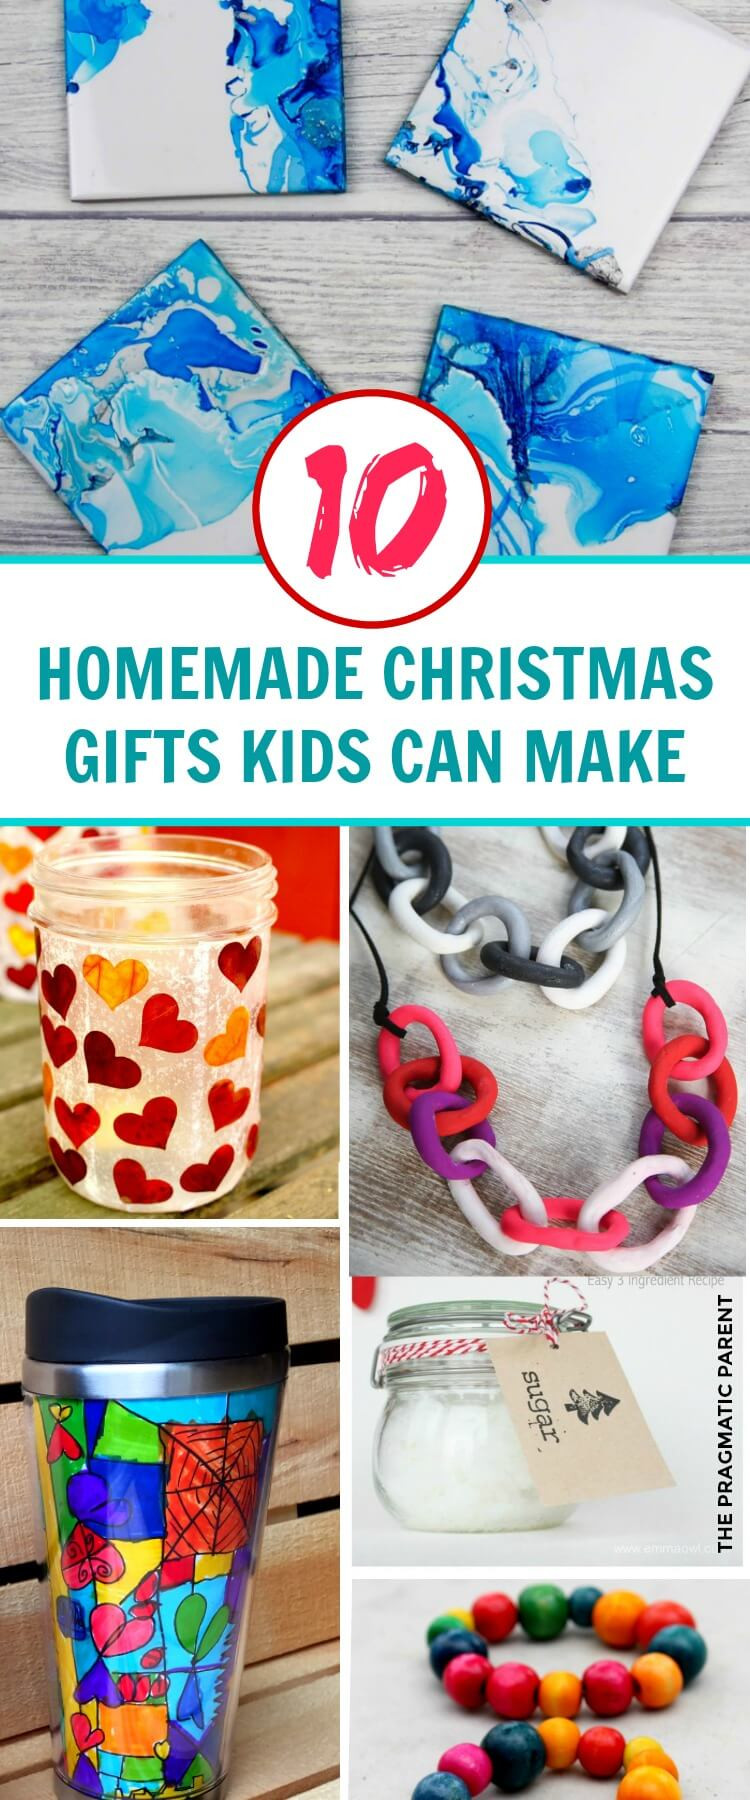 Easy Christmas Gifts For Kids
 10 Beautiful Homemade Christmas Gifts Kids Can Make This 2020